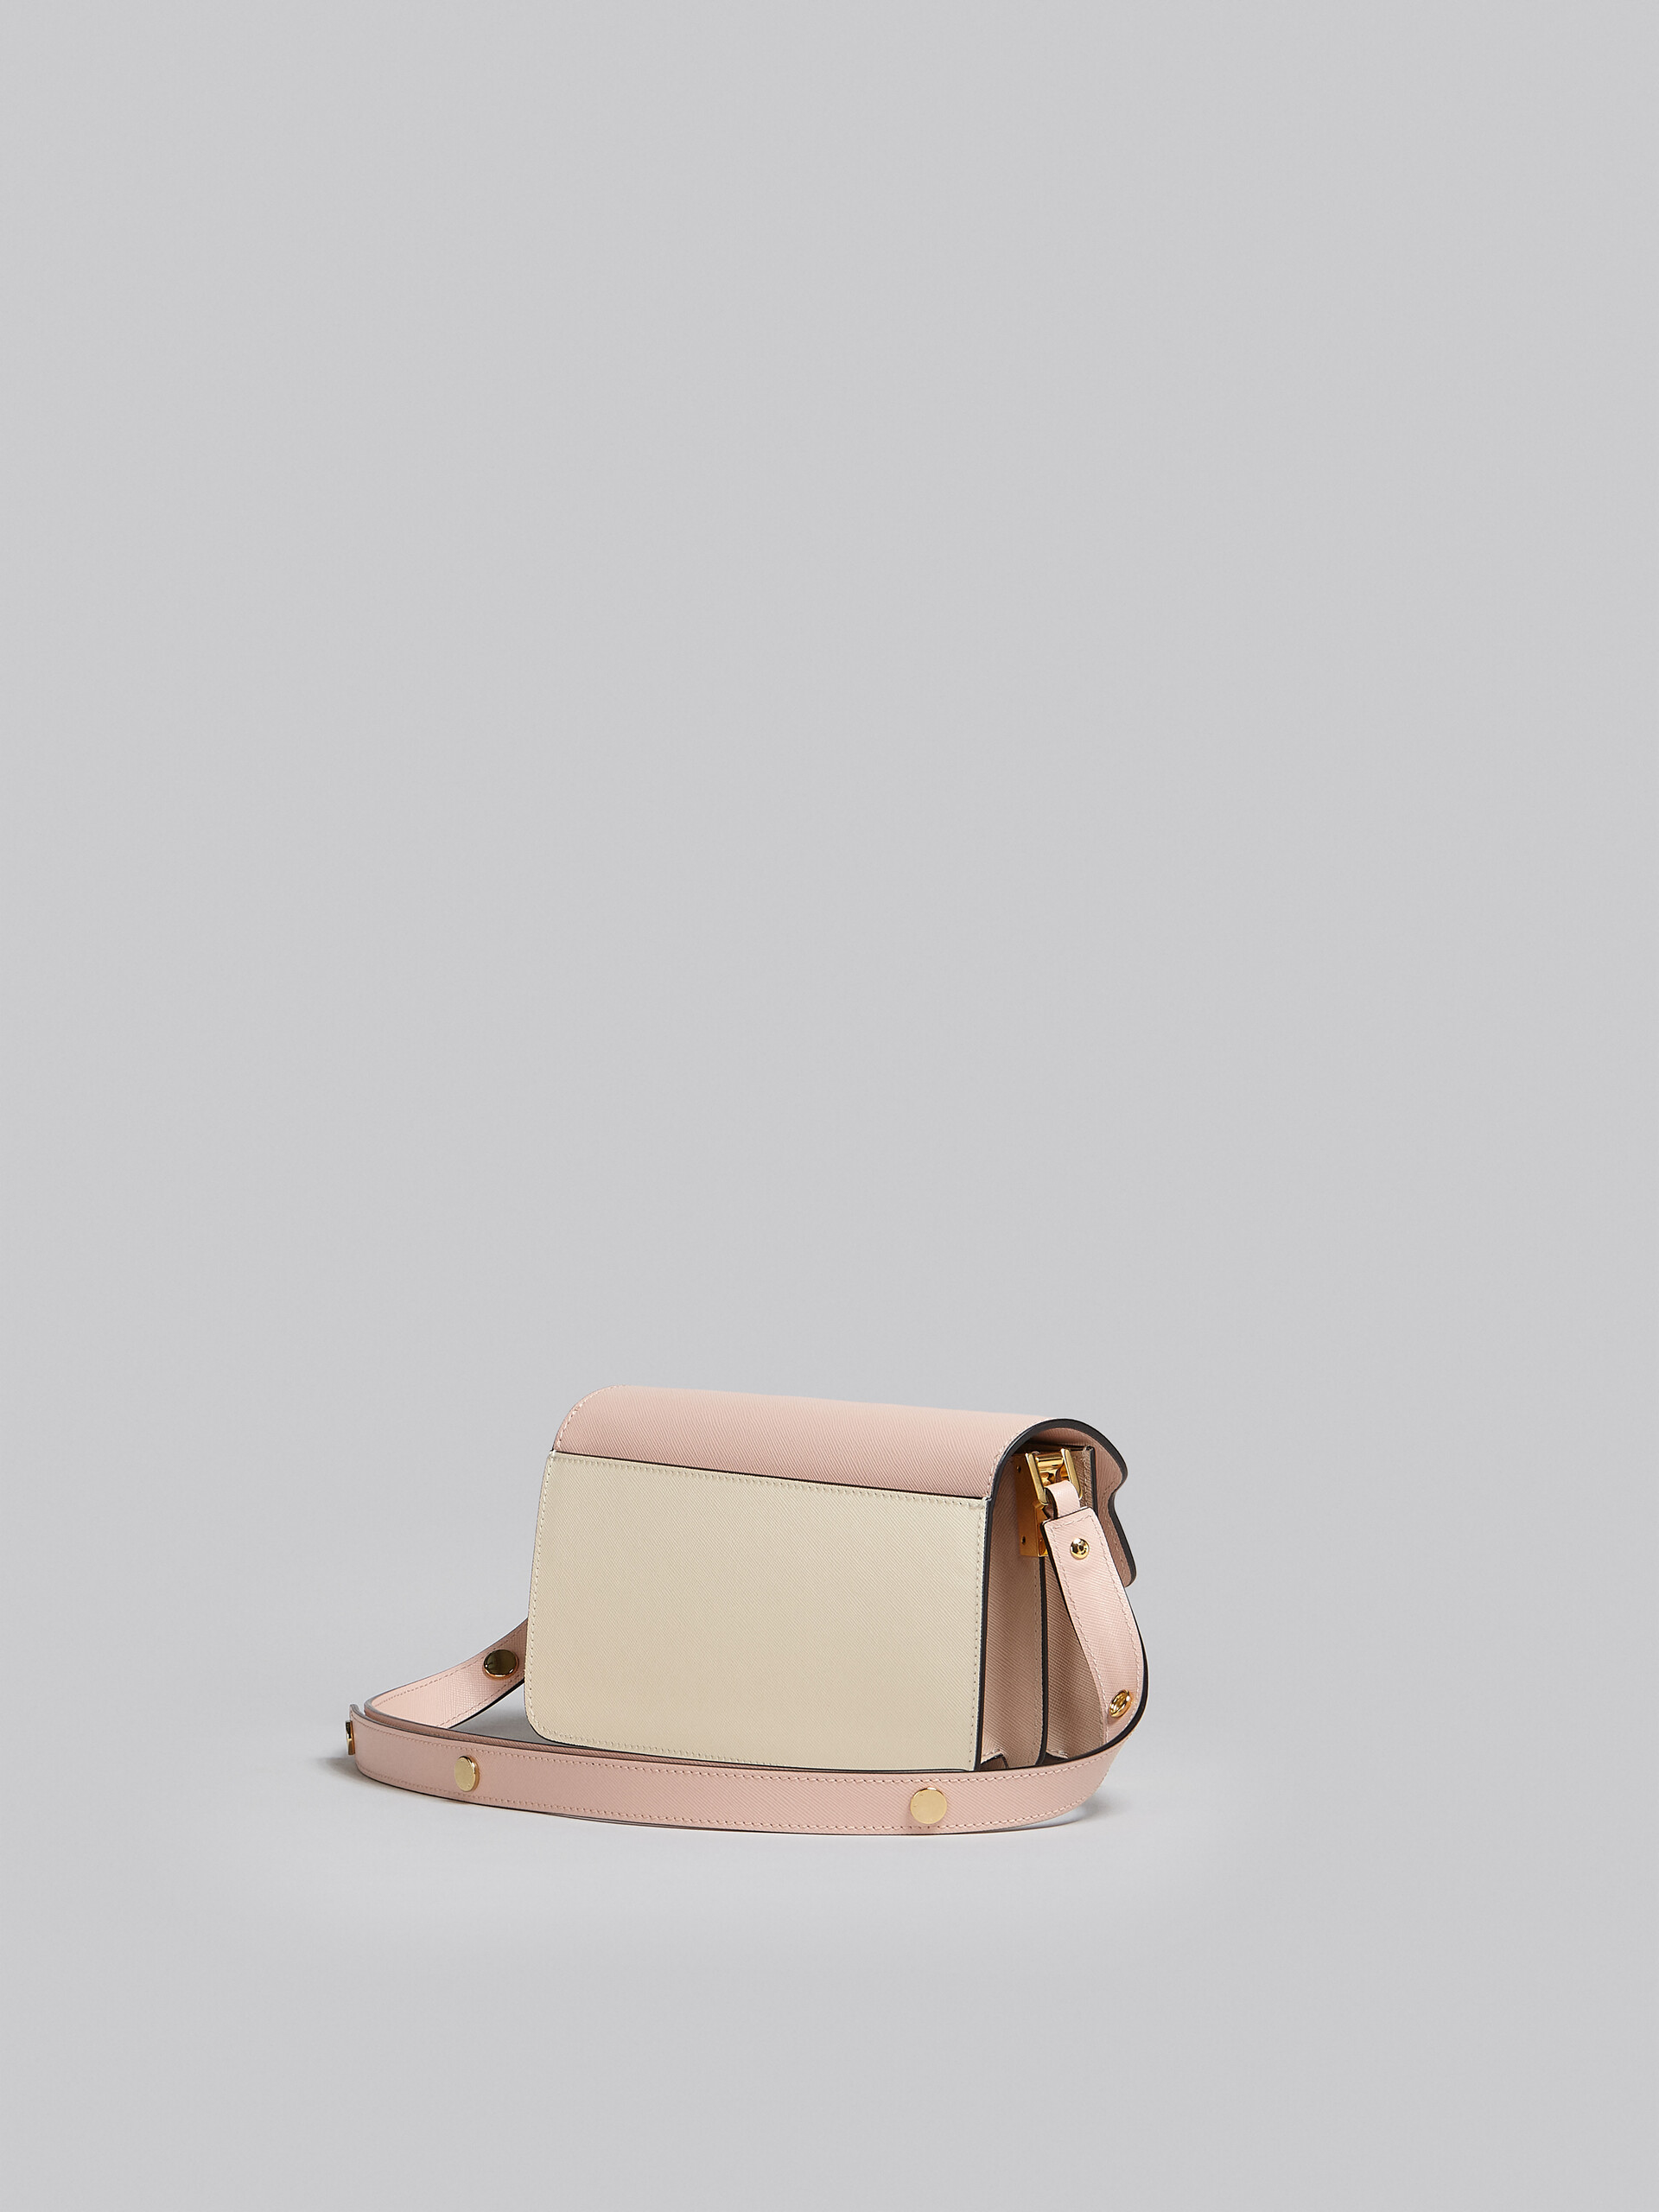 Trunk Bag E/W in pink and white saffiano leather - Shoulder Bag - Image 3